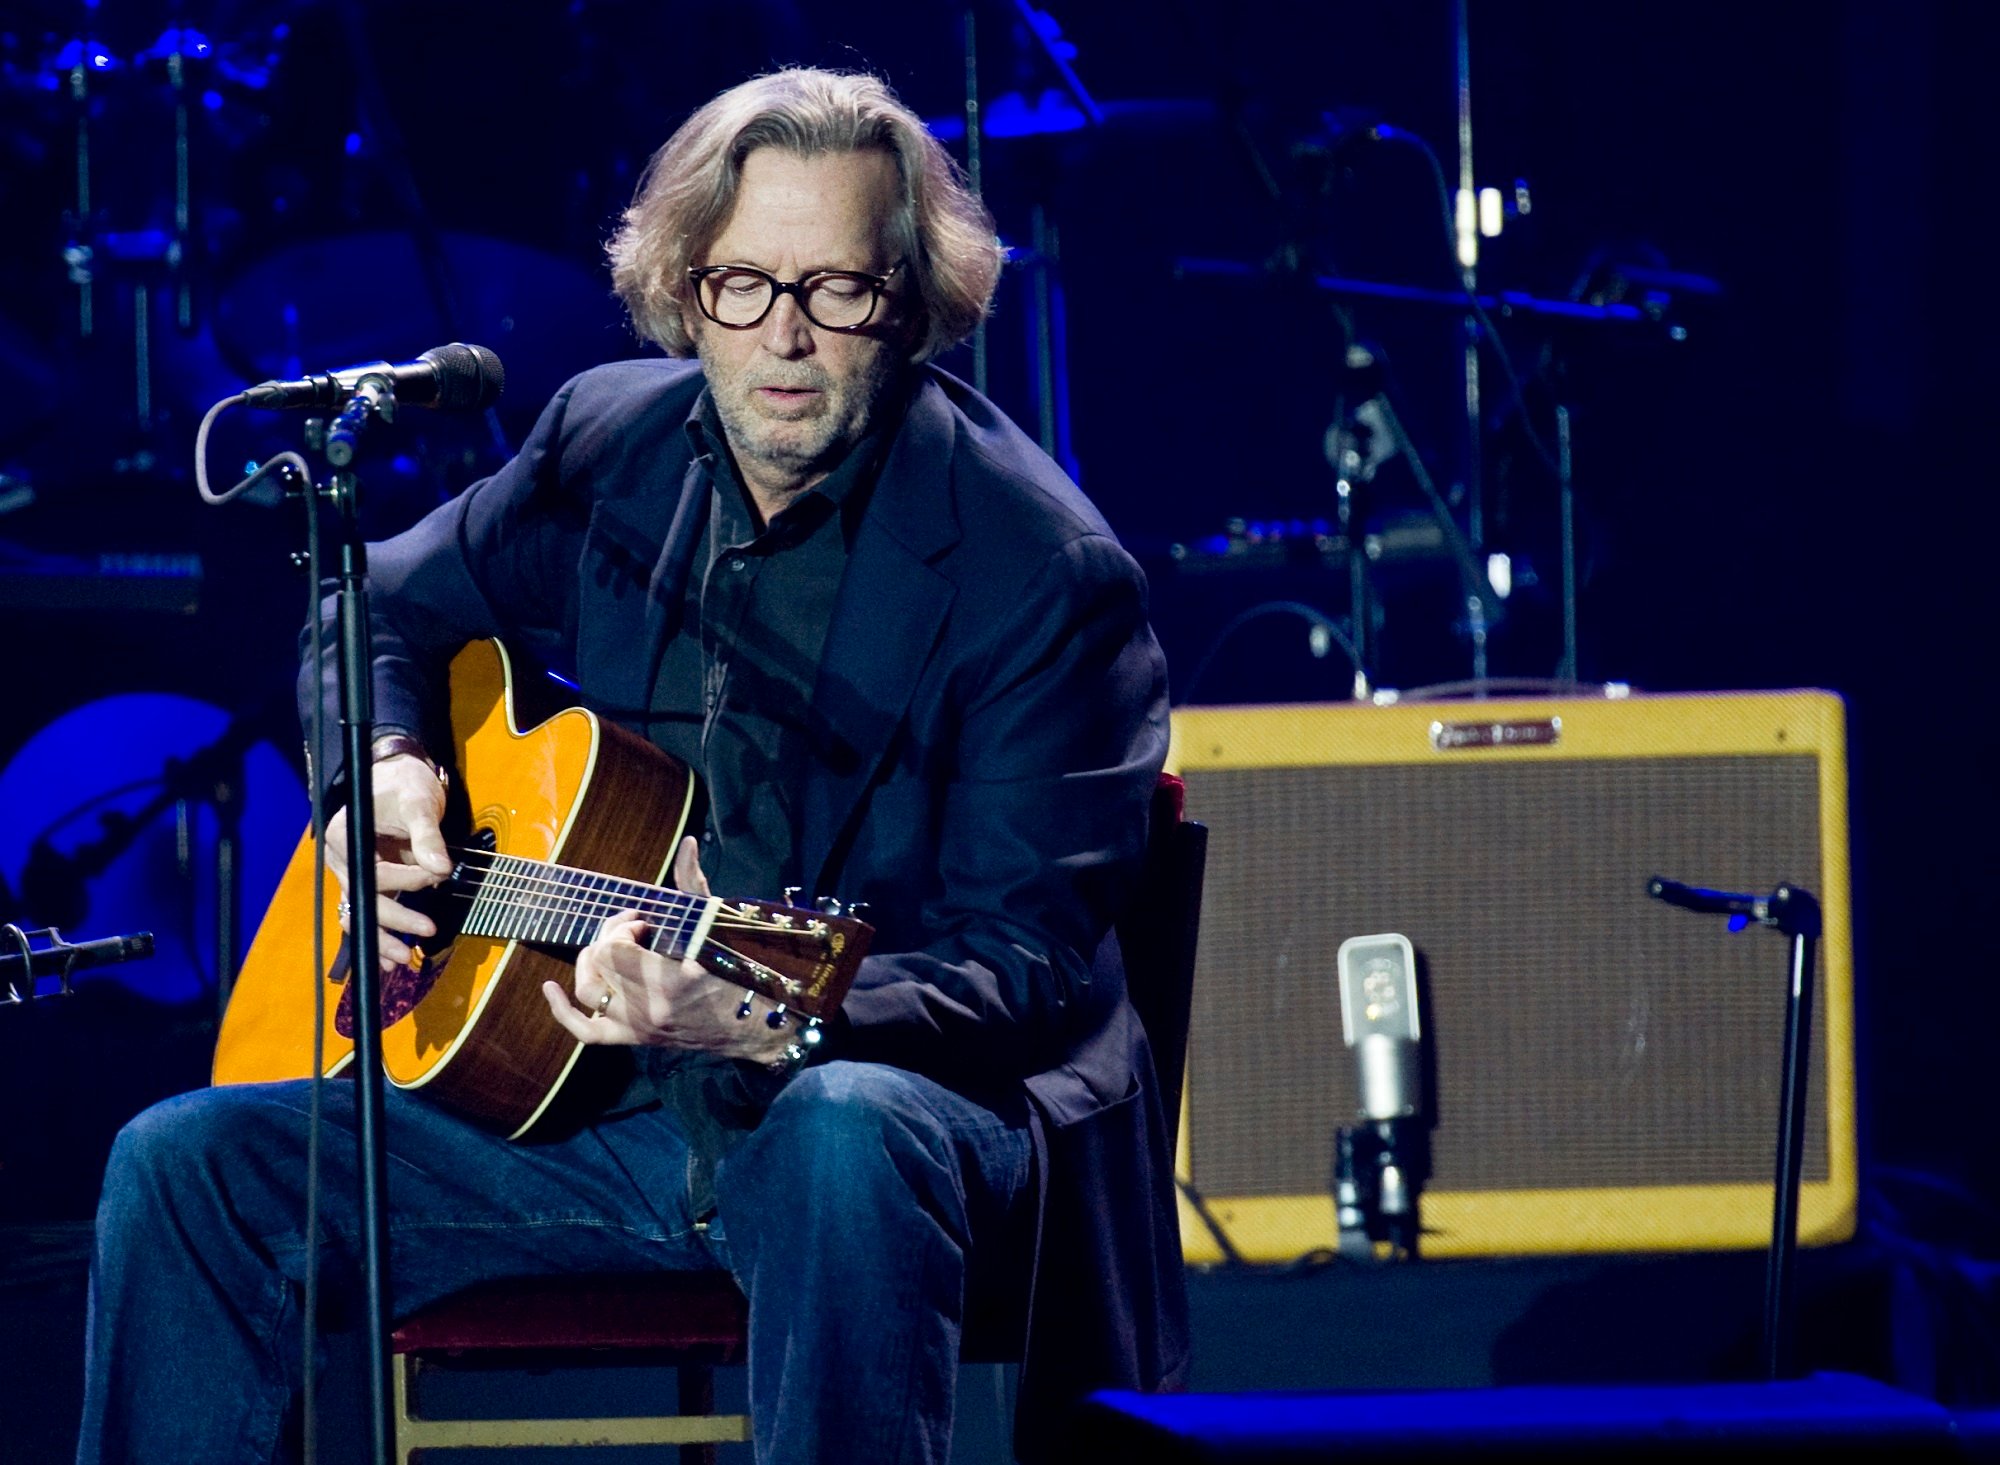 Eric Clapton performs on stage with a Martin 000-28EC acoustic guitar